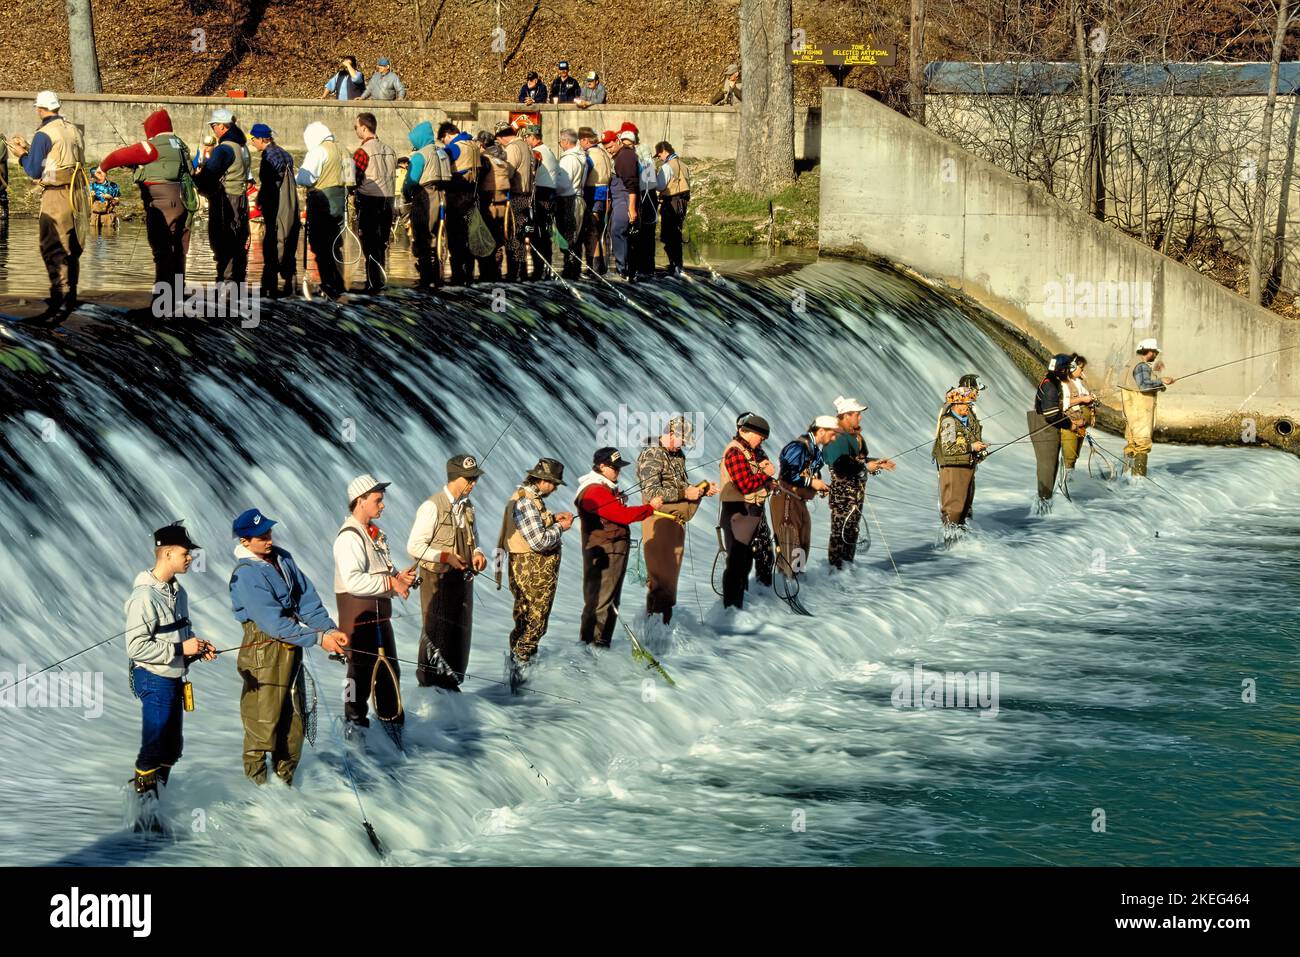 Trout fishermen gather at a prized spot along the base of the dam for March 1 opening day of Missouri Trout season at Bennett Spring State Park Stock Photo